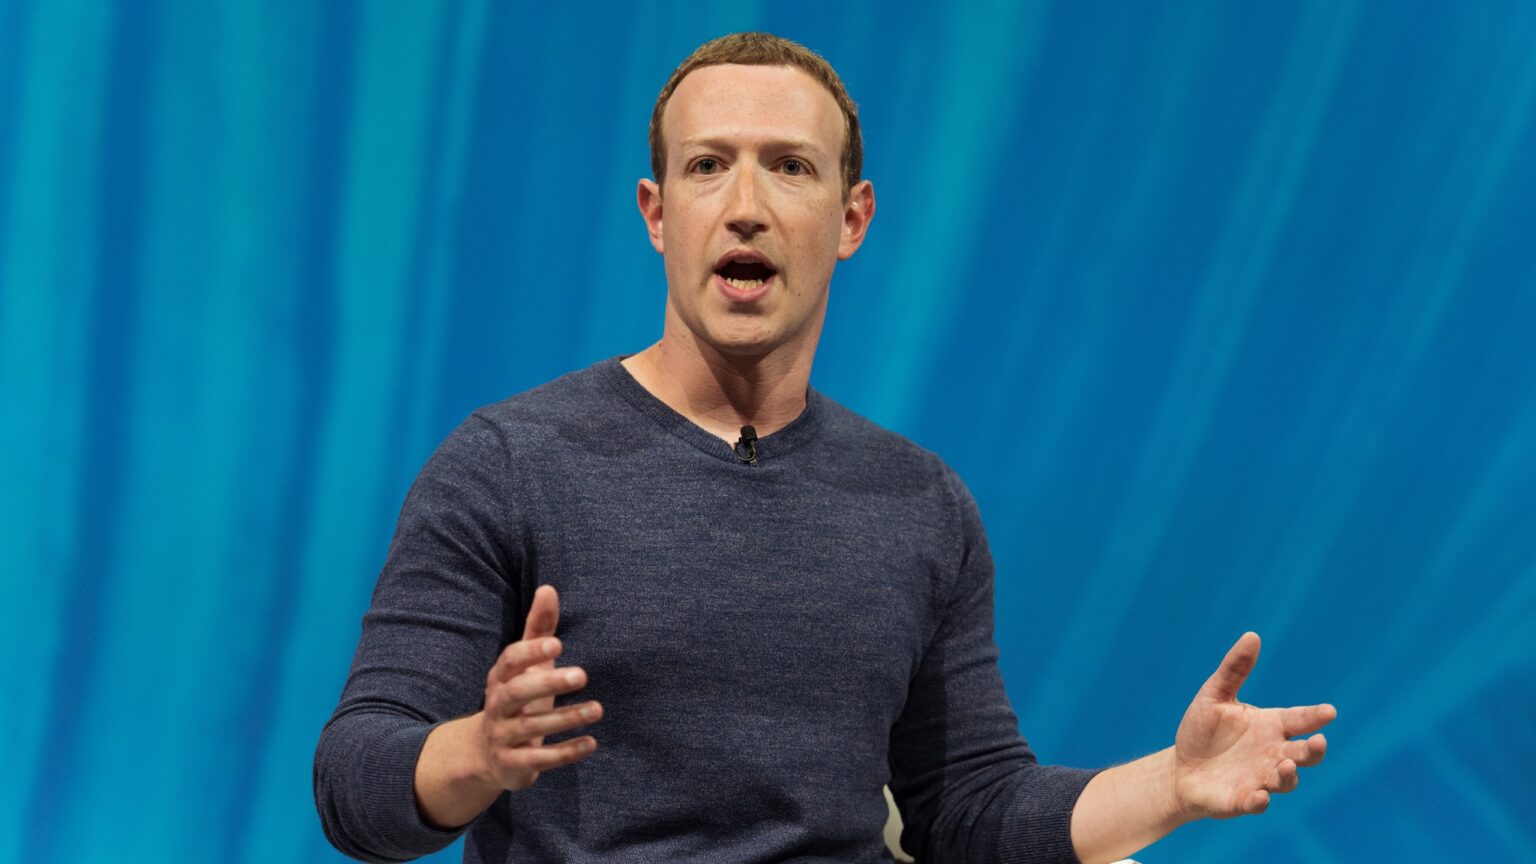 Zuckerberg: 'Our Metaverse Brings People Together, Apple's Keeps Them Apart'